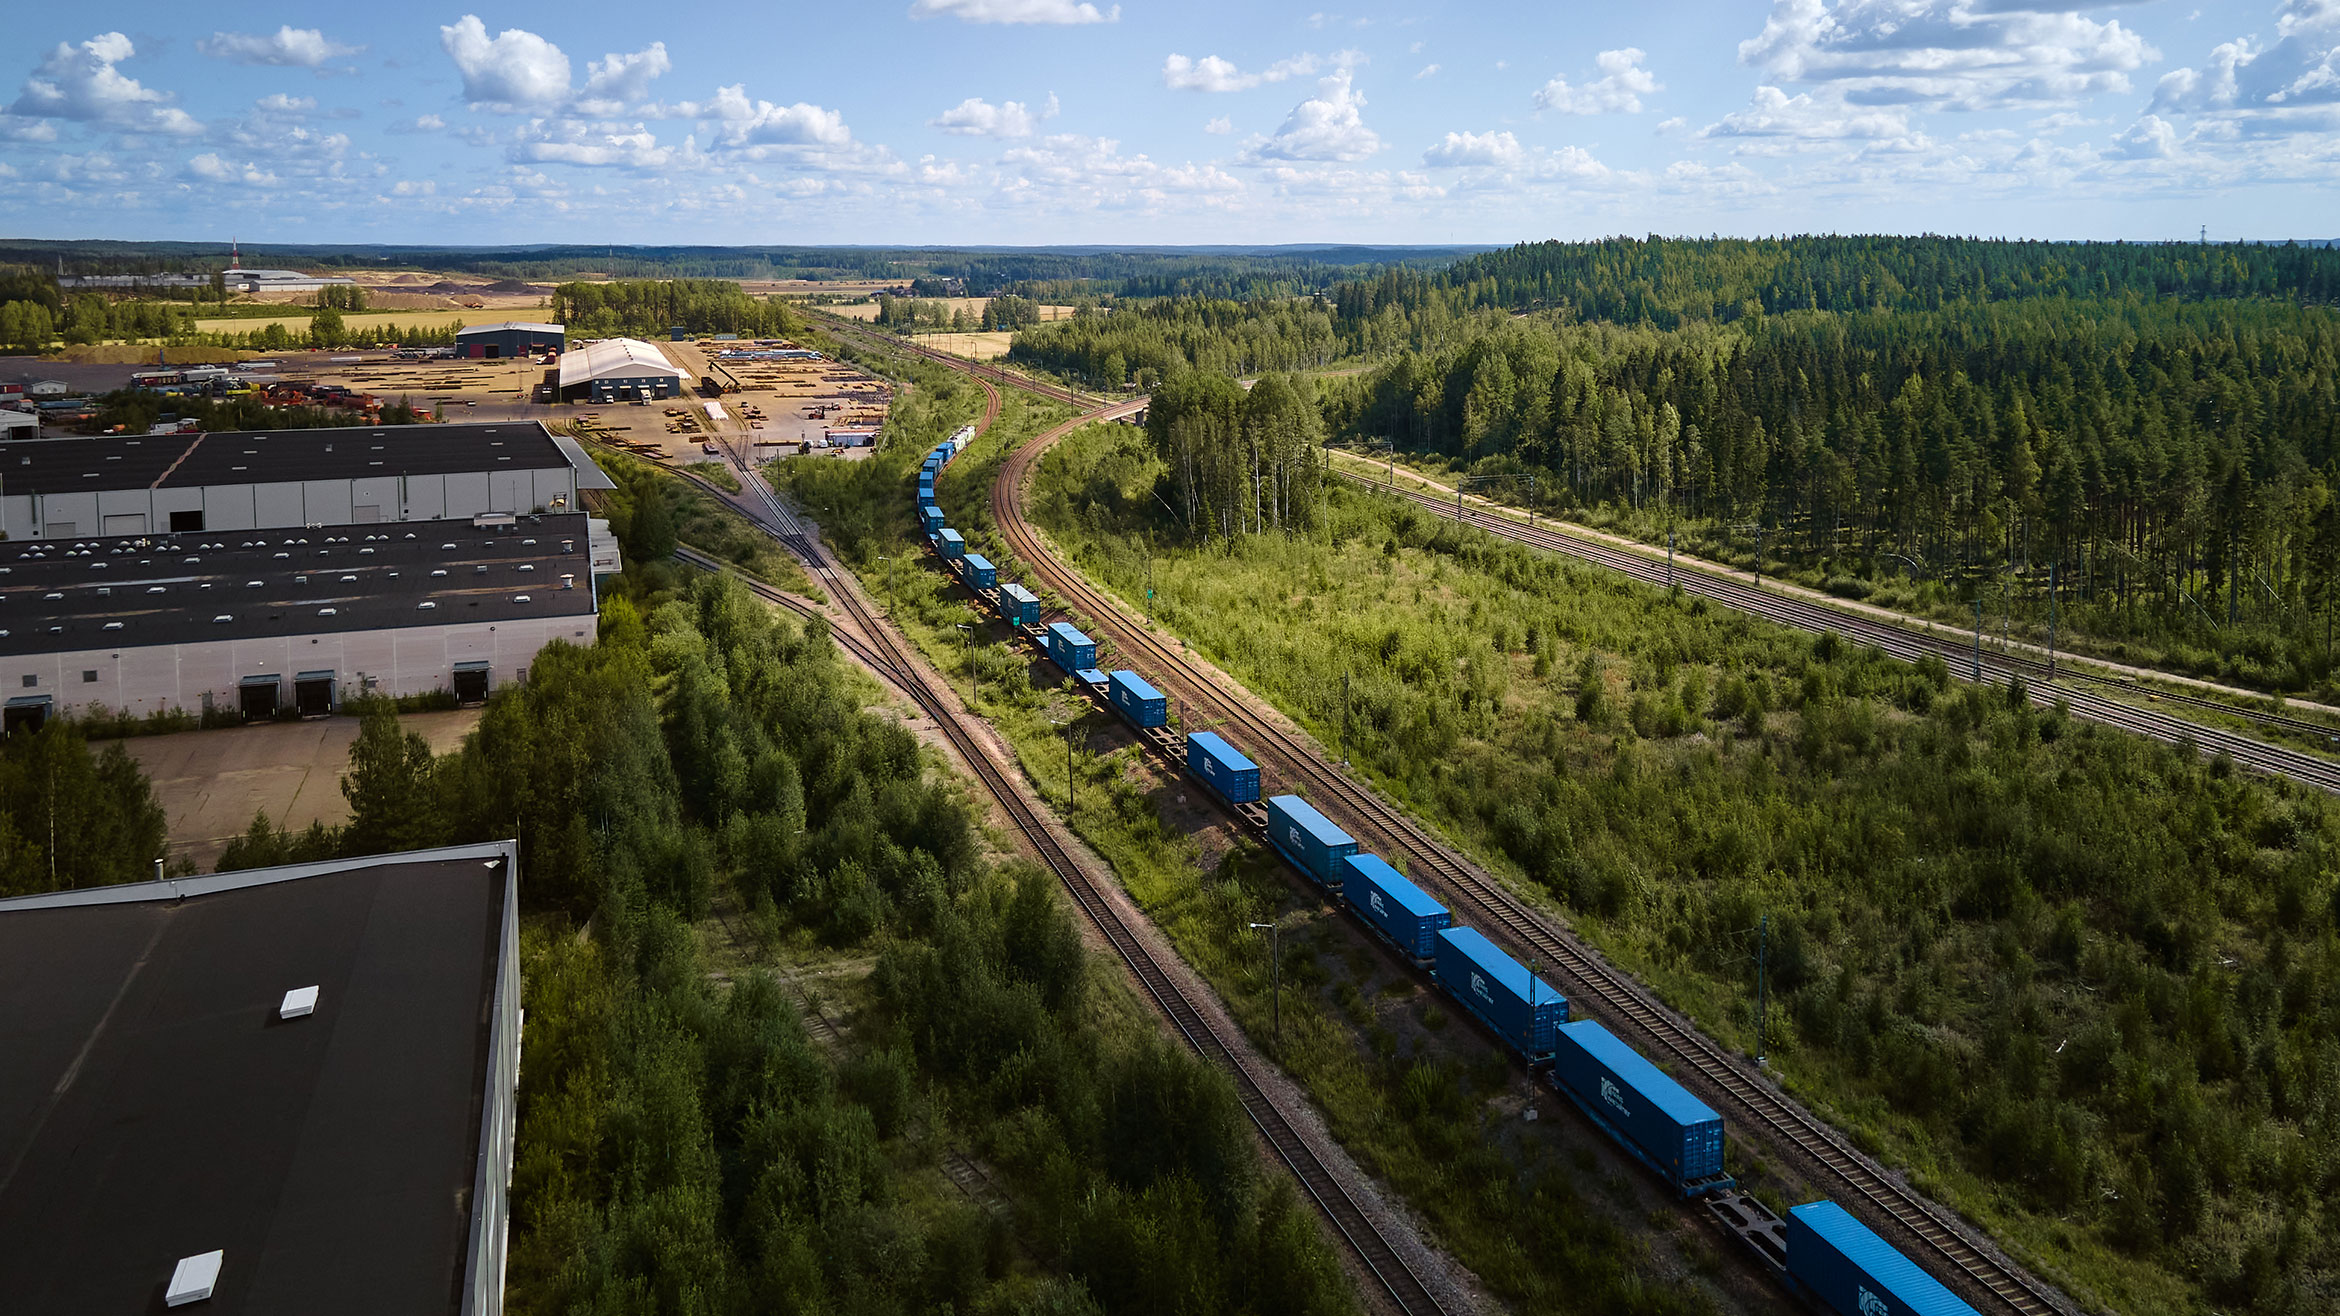 08-Blue-train-containers-on-rail.jpg